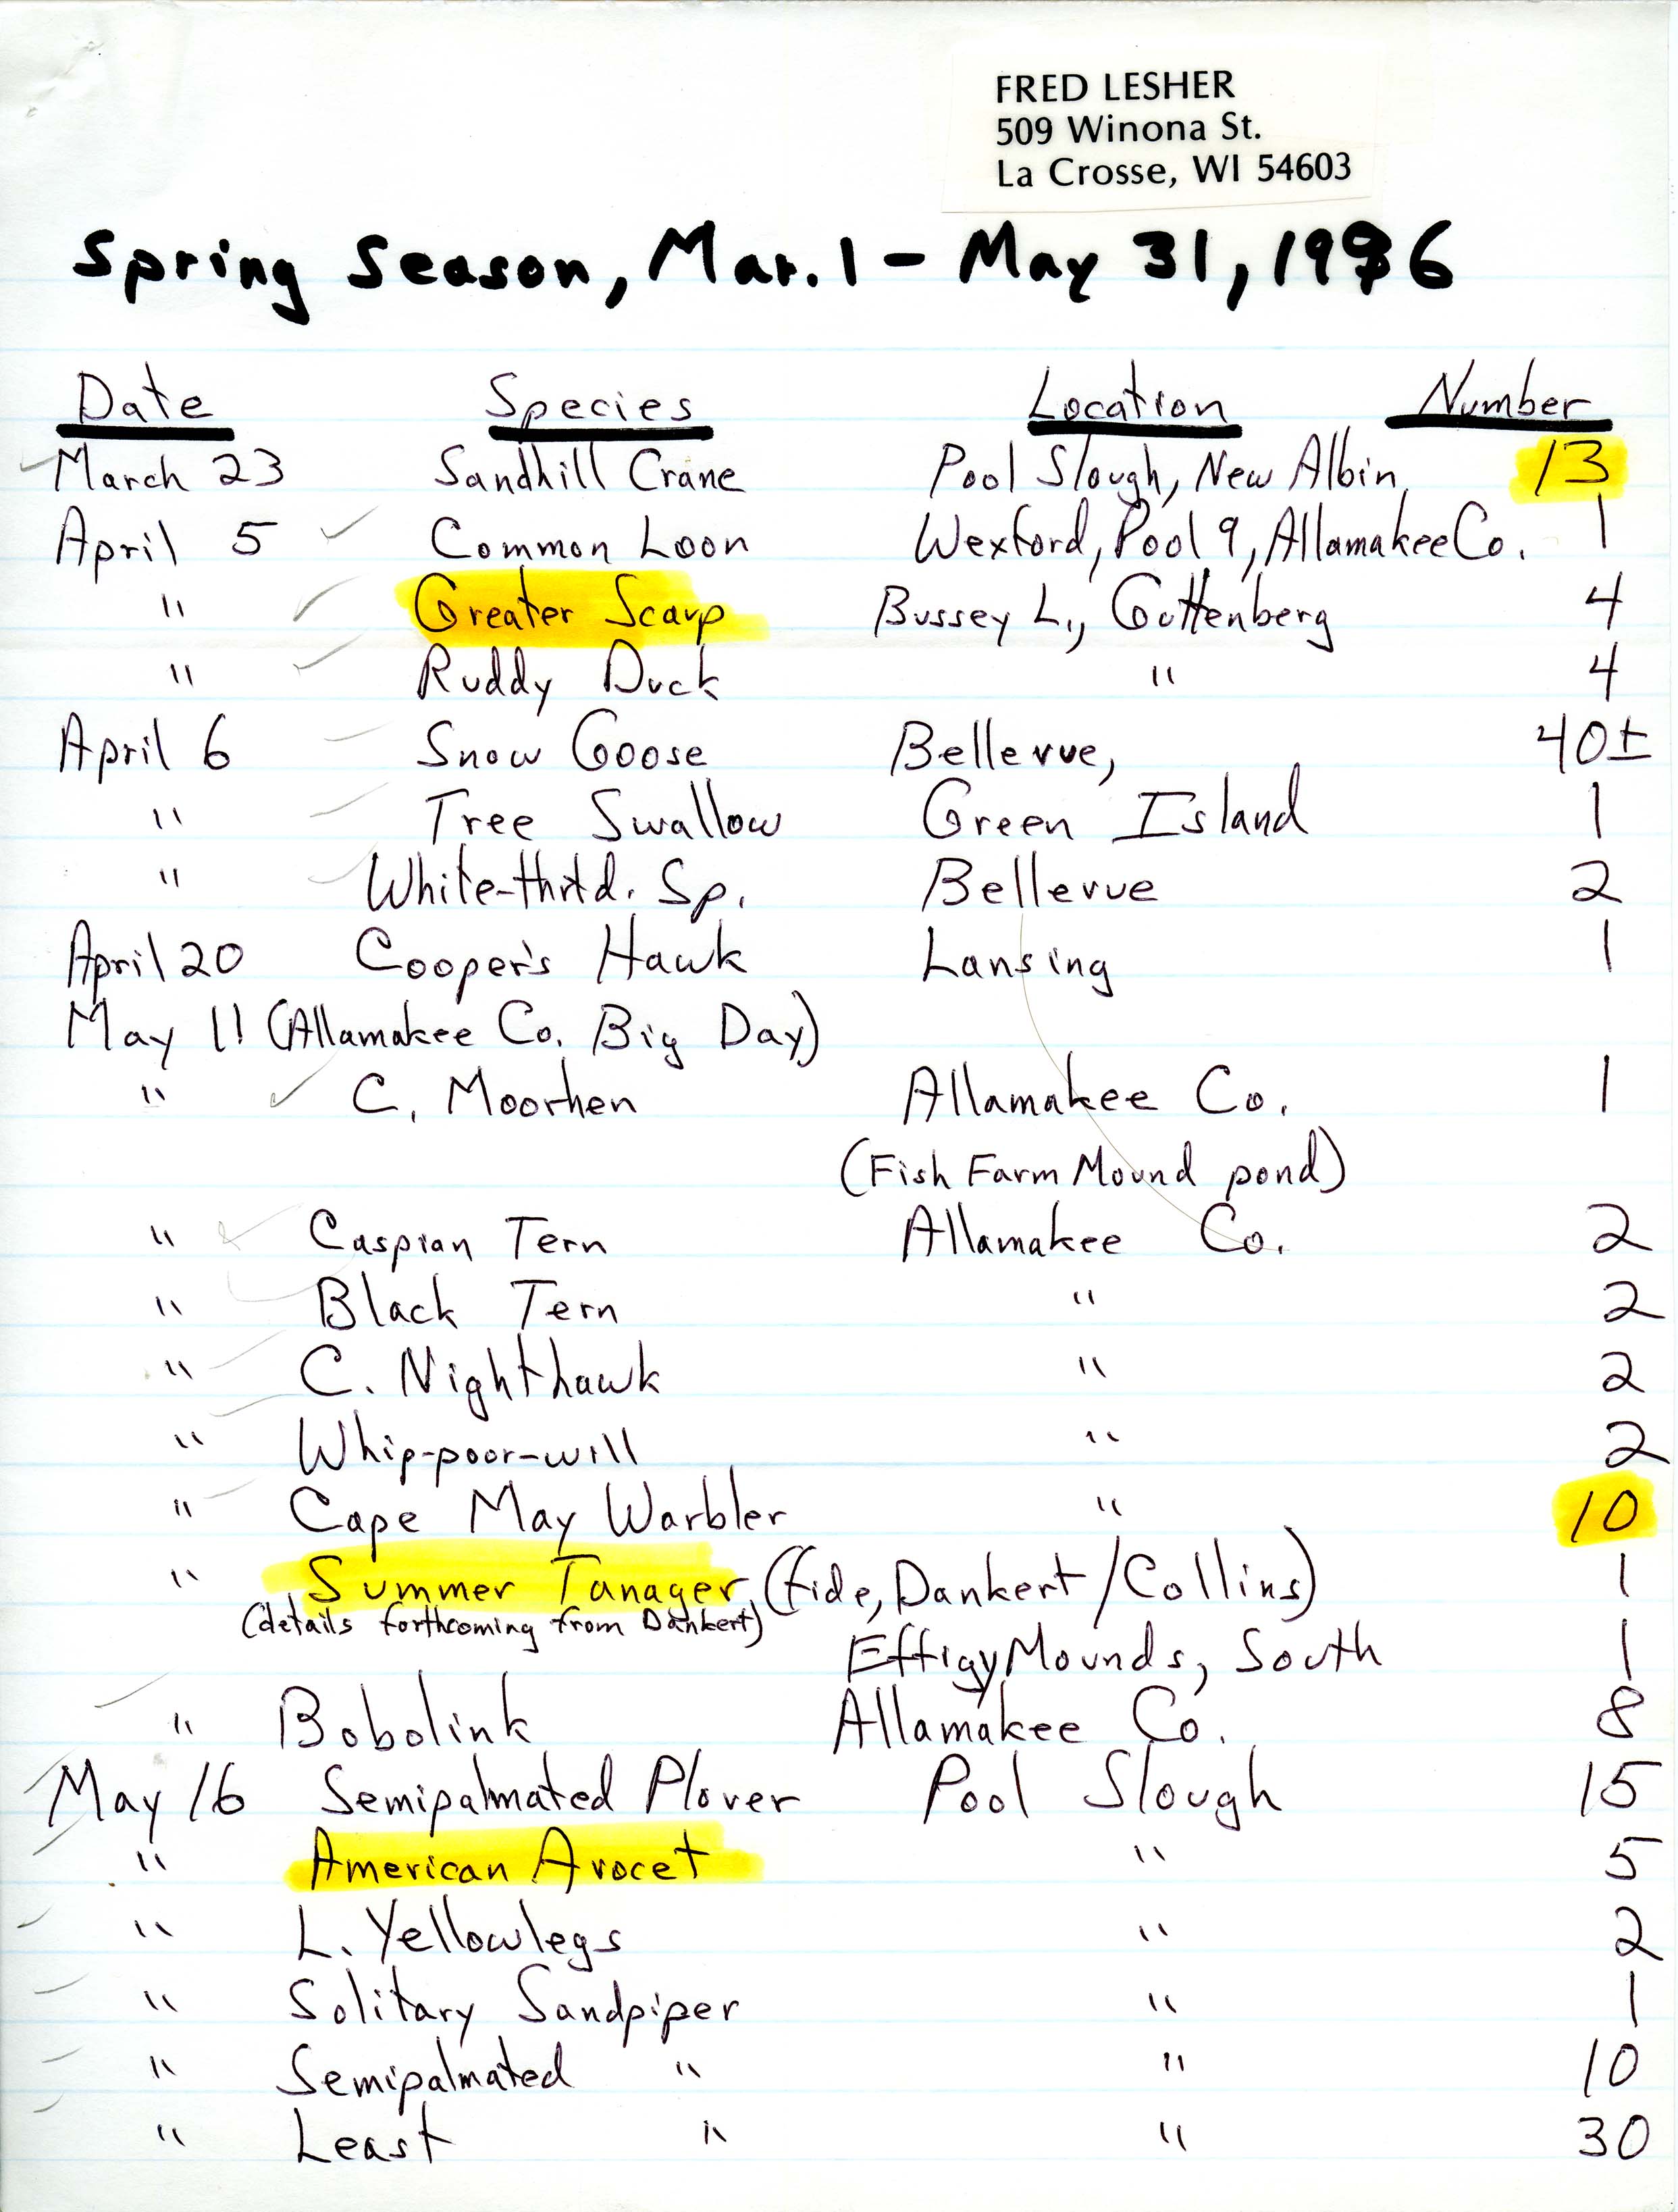 Field notes contributed by Fred Lesher, spring 1996